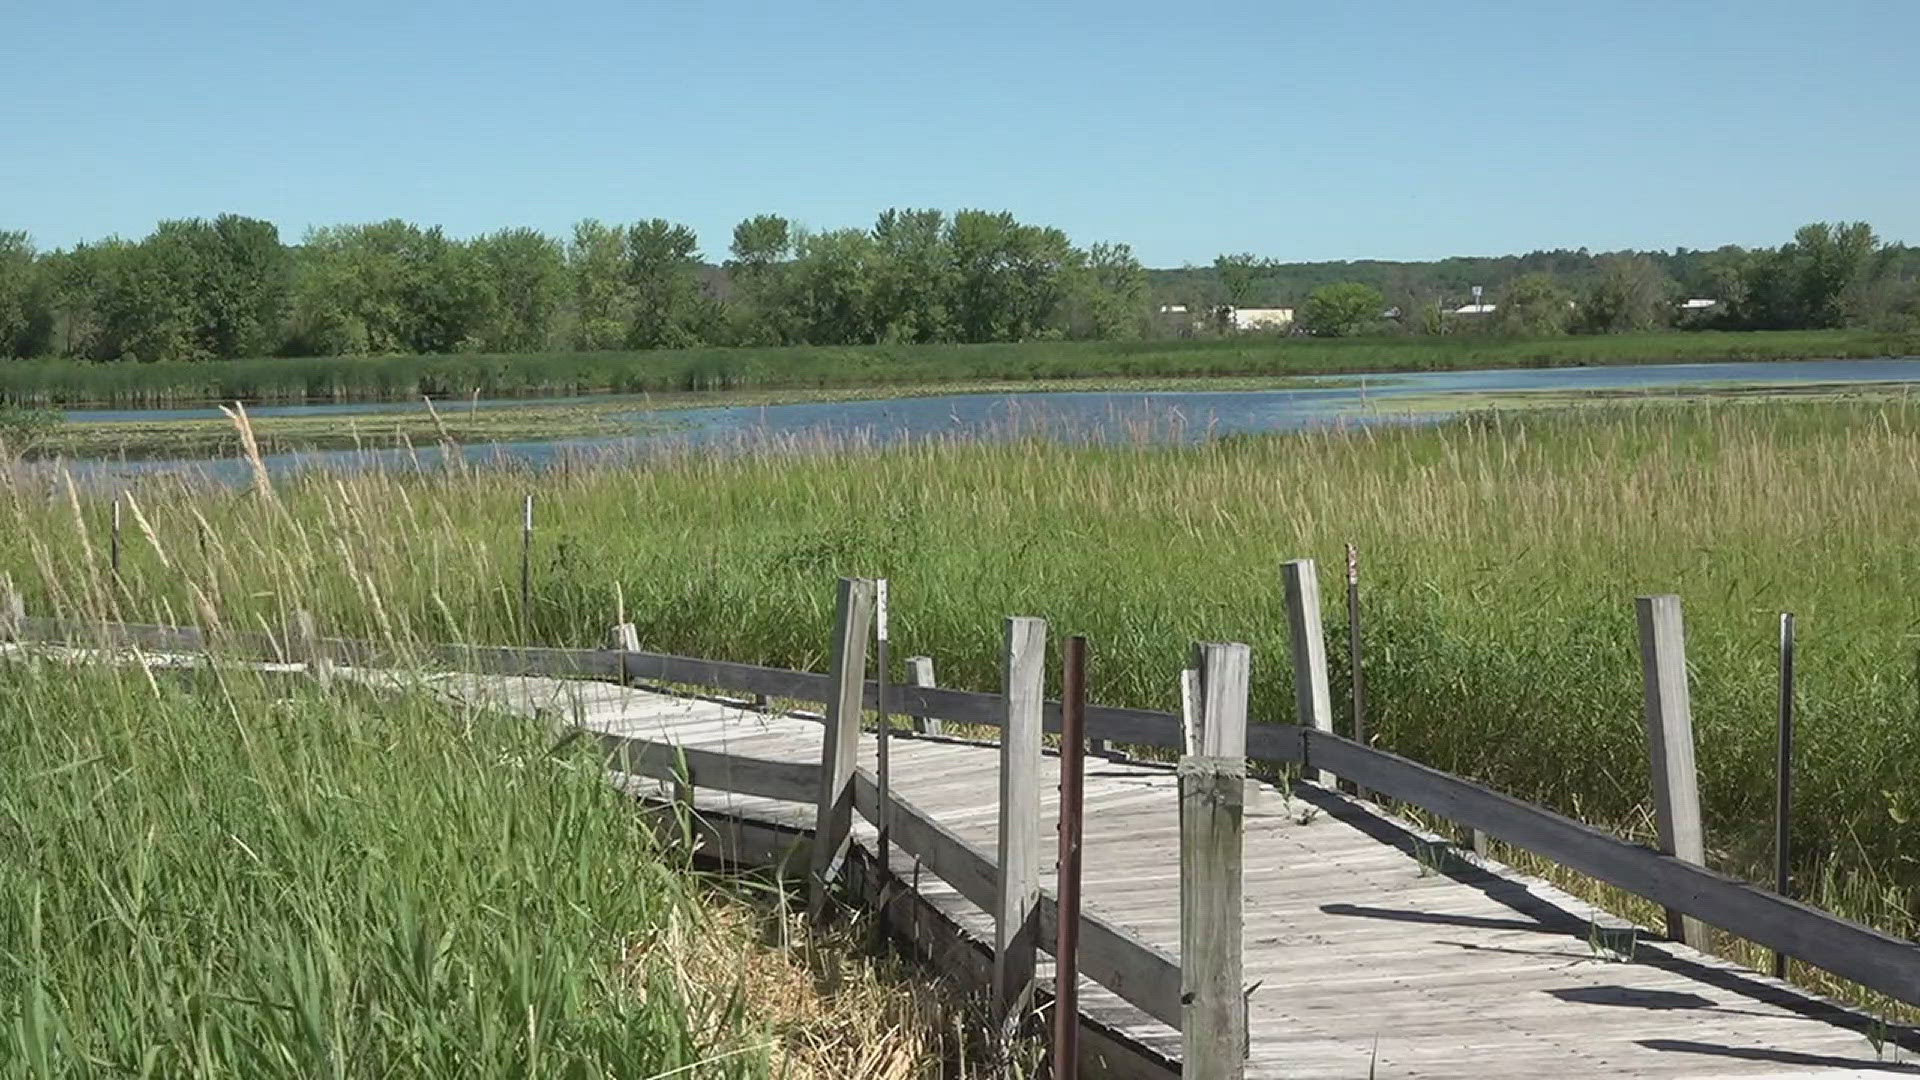 Educators from across the country attended a week long event at Nahant Marsh in Davenport to explore topics related to the Mississippi River ecosystem.